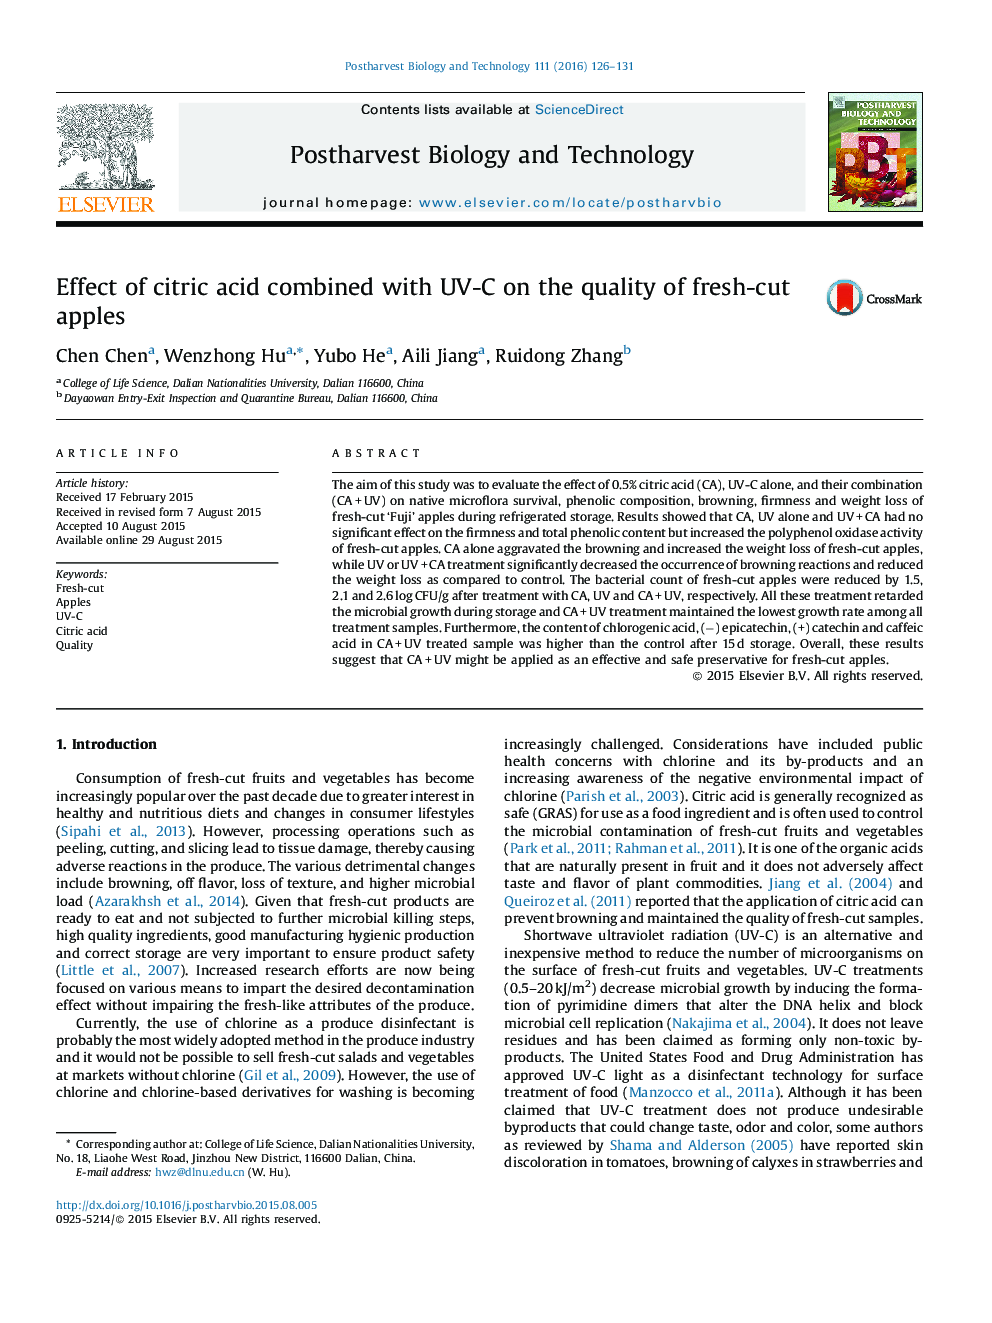 Effect of citric acid combined with UV-C on the quality of fresh-cut apples